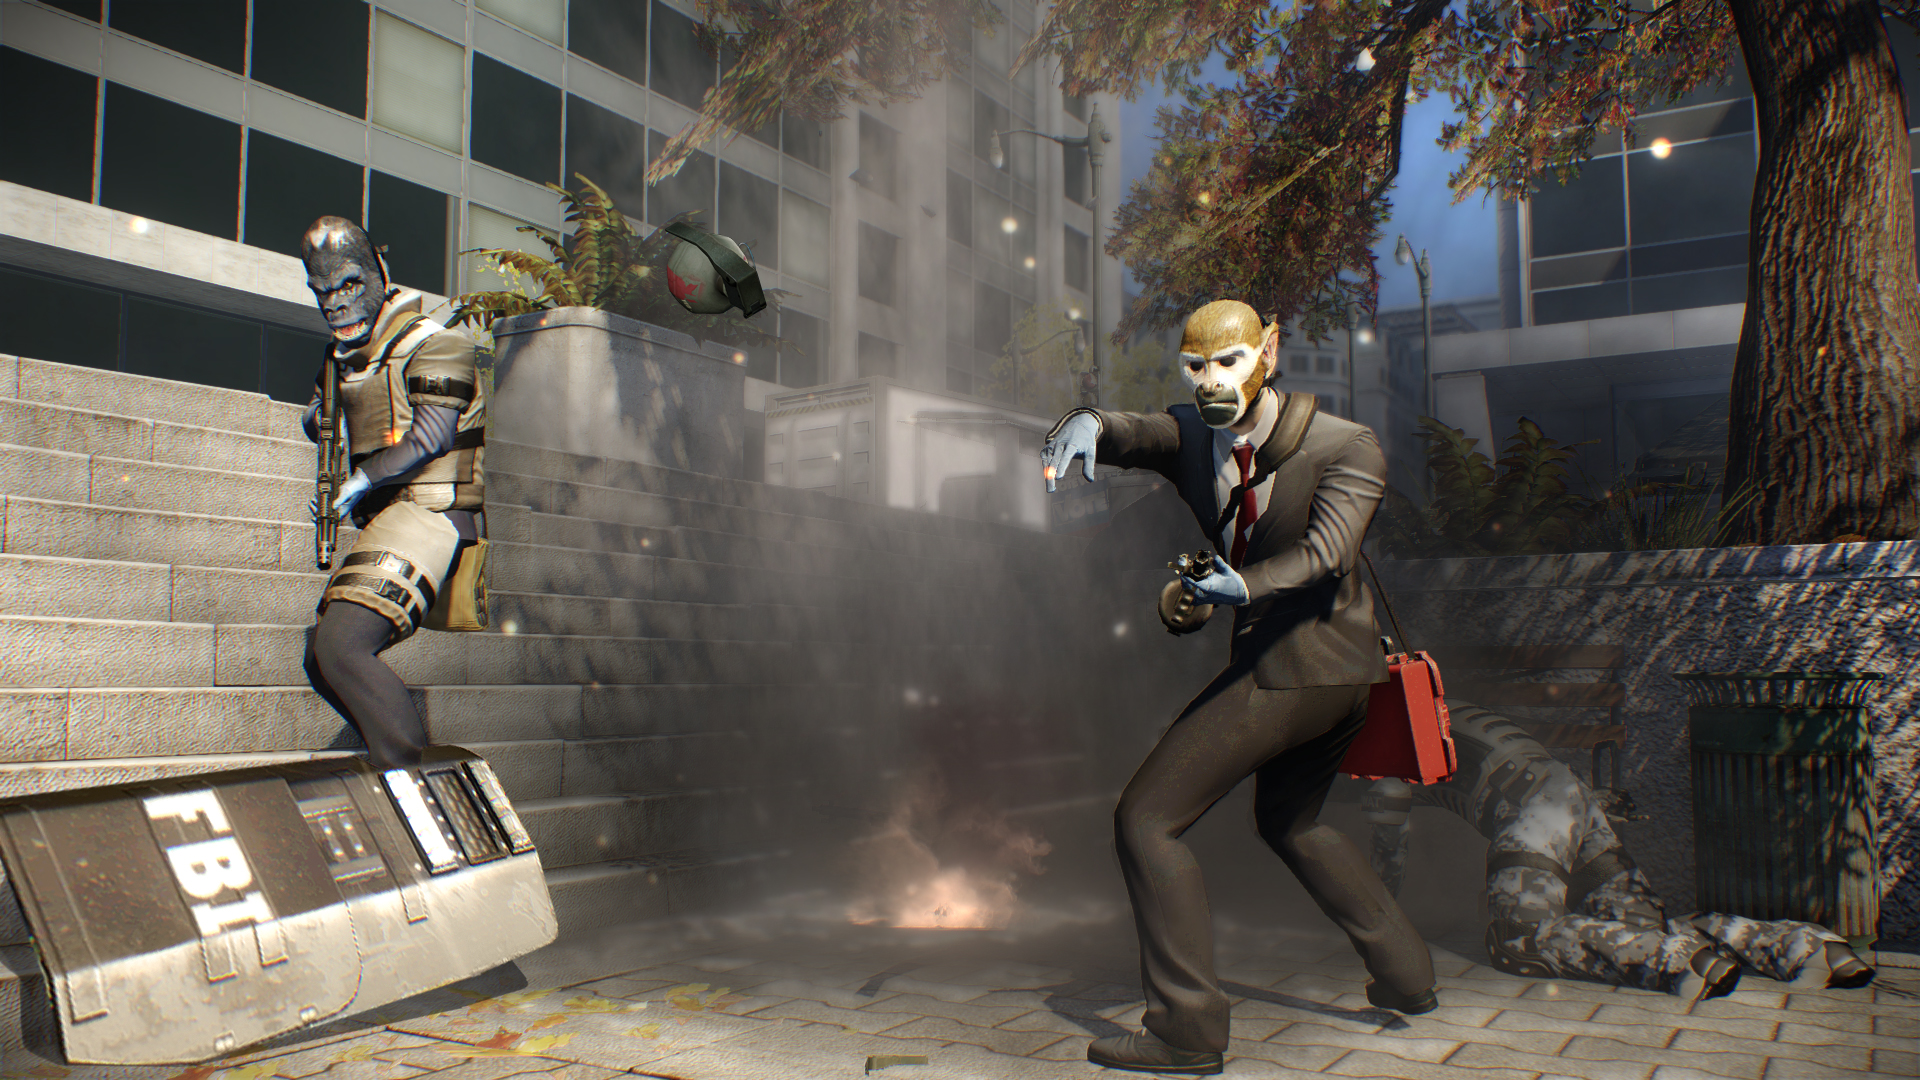 Image 3 - PAYDAY 2: Crackdown Difficulty mod for Payday 2 - Mod DB